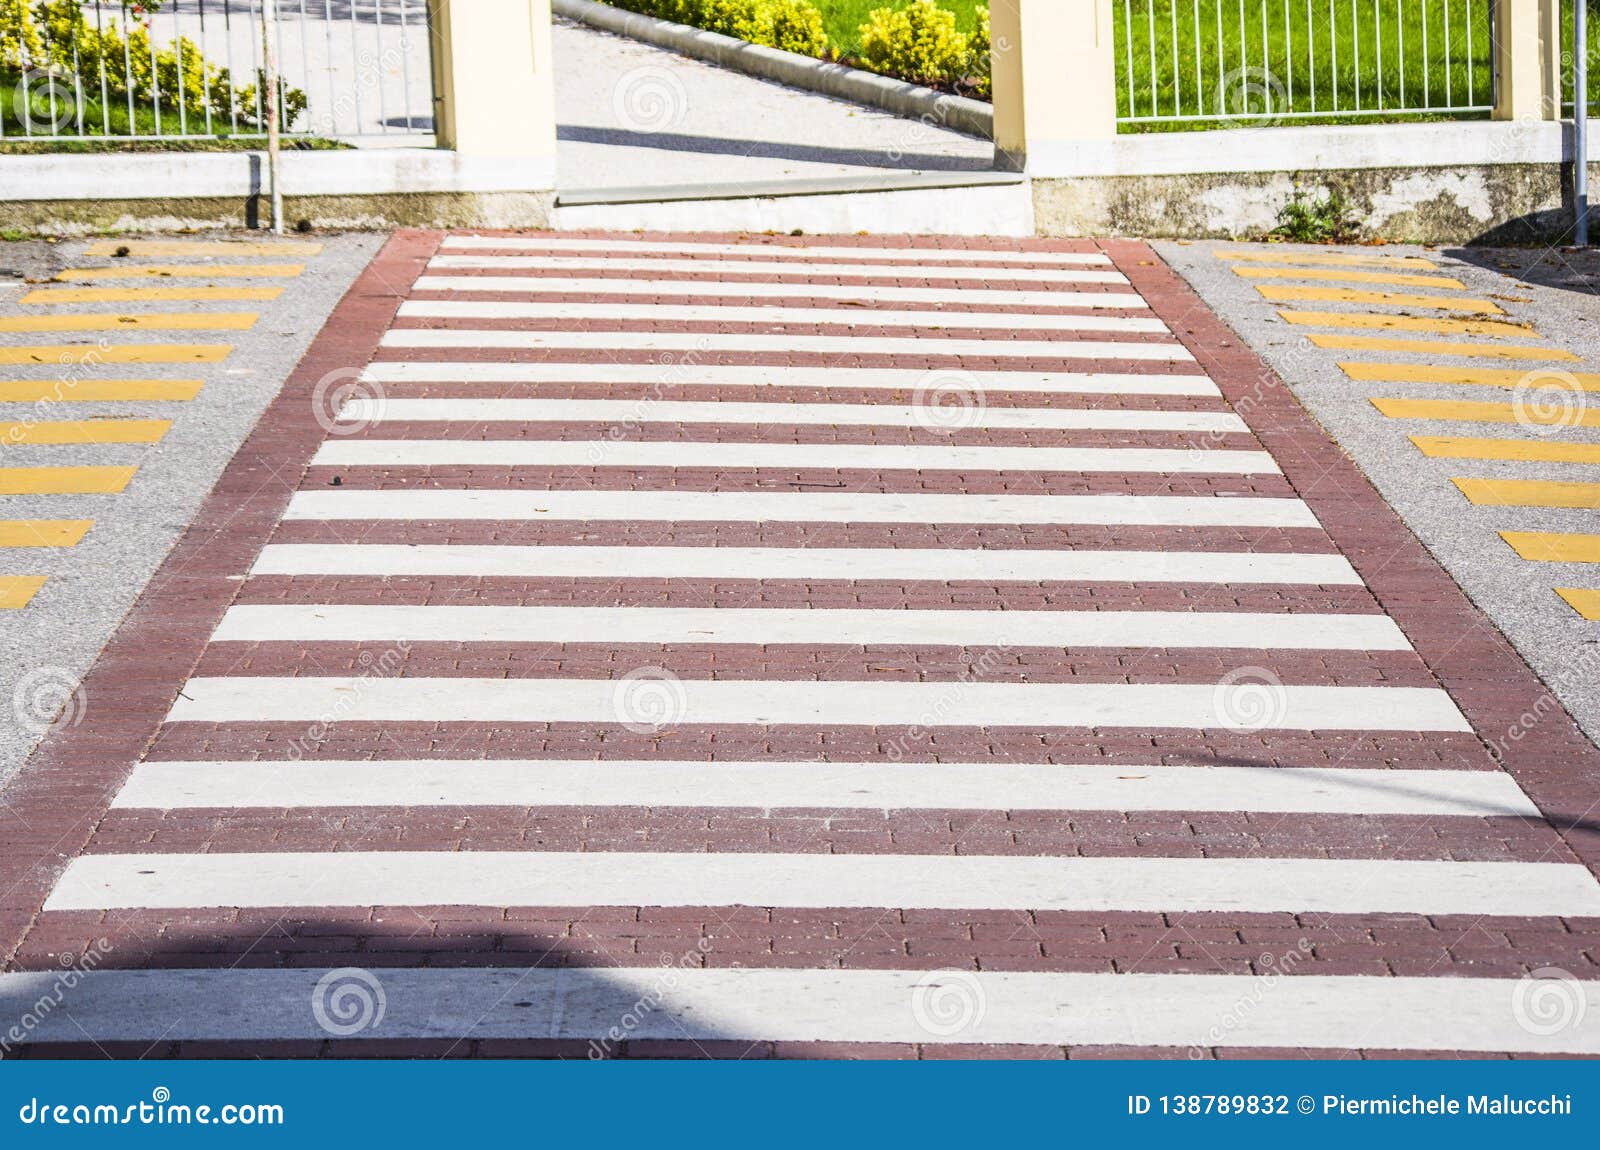 Pedestrian Crossing Marked on the Asphalt Stock Photo - Image of ...